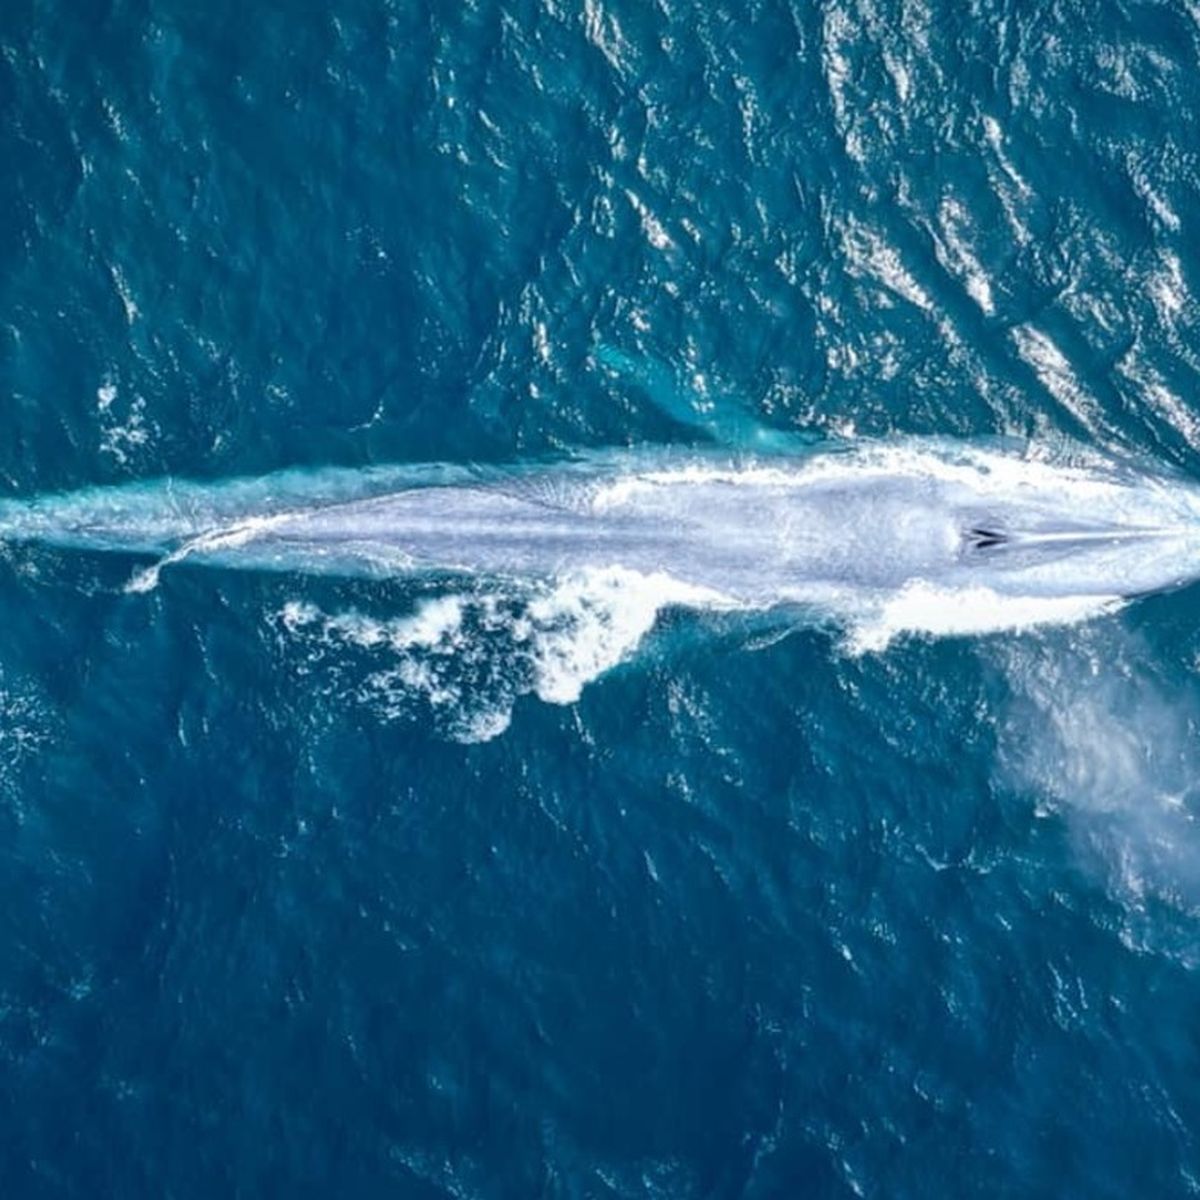 Blue whale spotted off Sydney coast in 'extremely rare' sighting